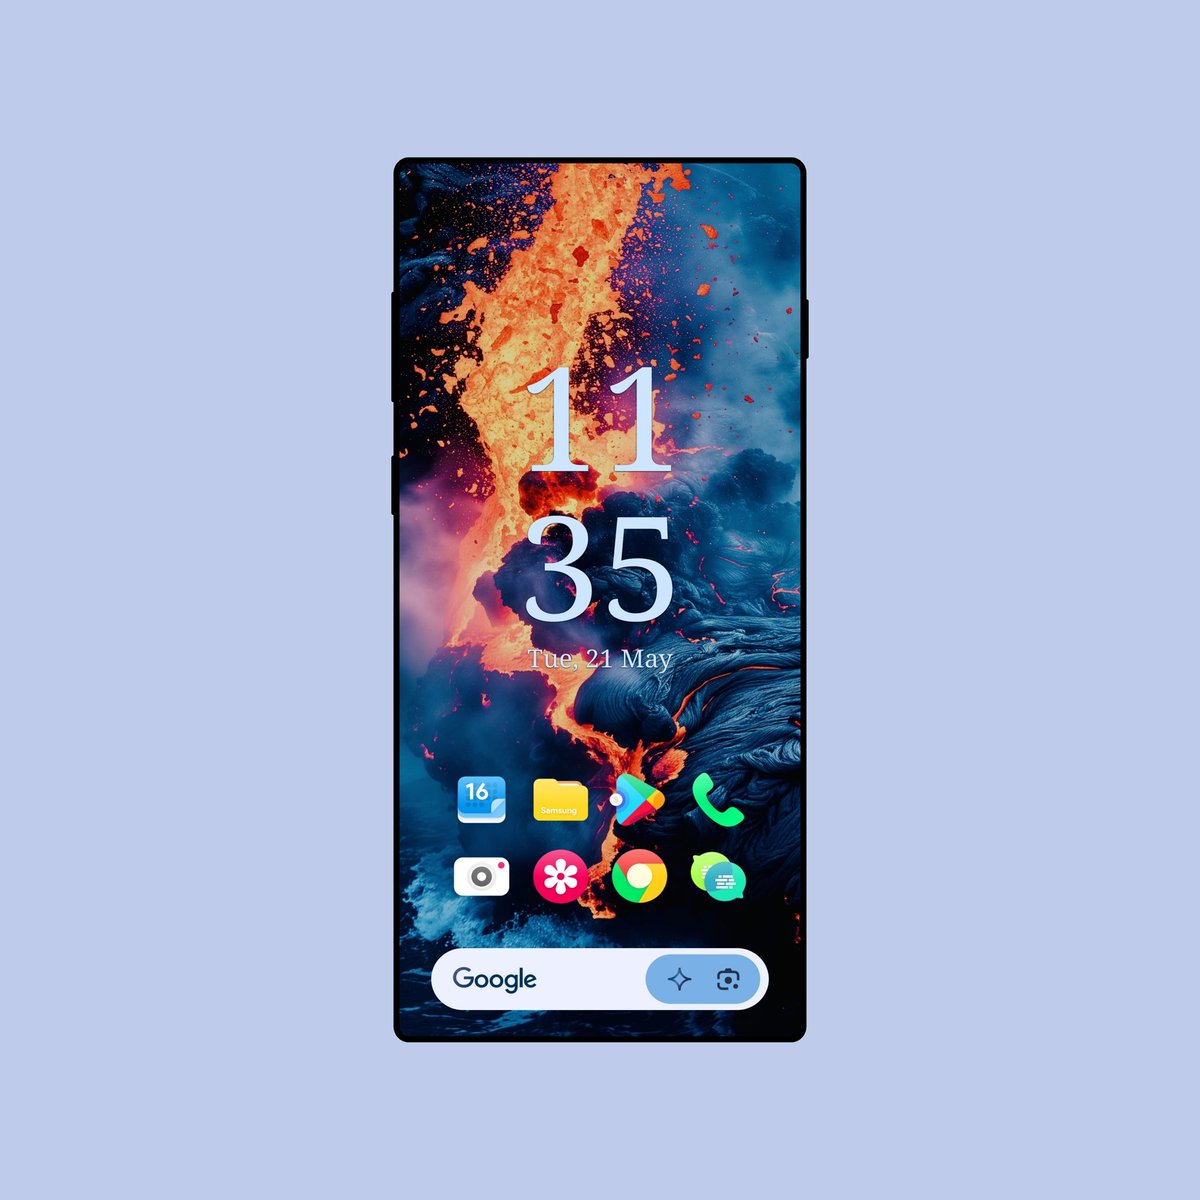 Pixel Clock widgets by Mohamed Ibrahim Places 3 wallpaper @InfinityPixels_ Search bar @pashapuma1 Nebula icons @starkdesigns18